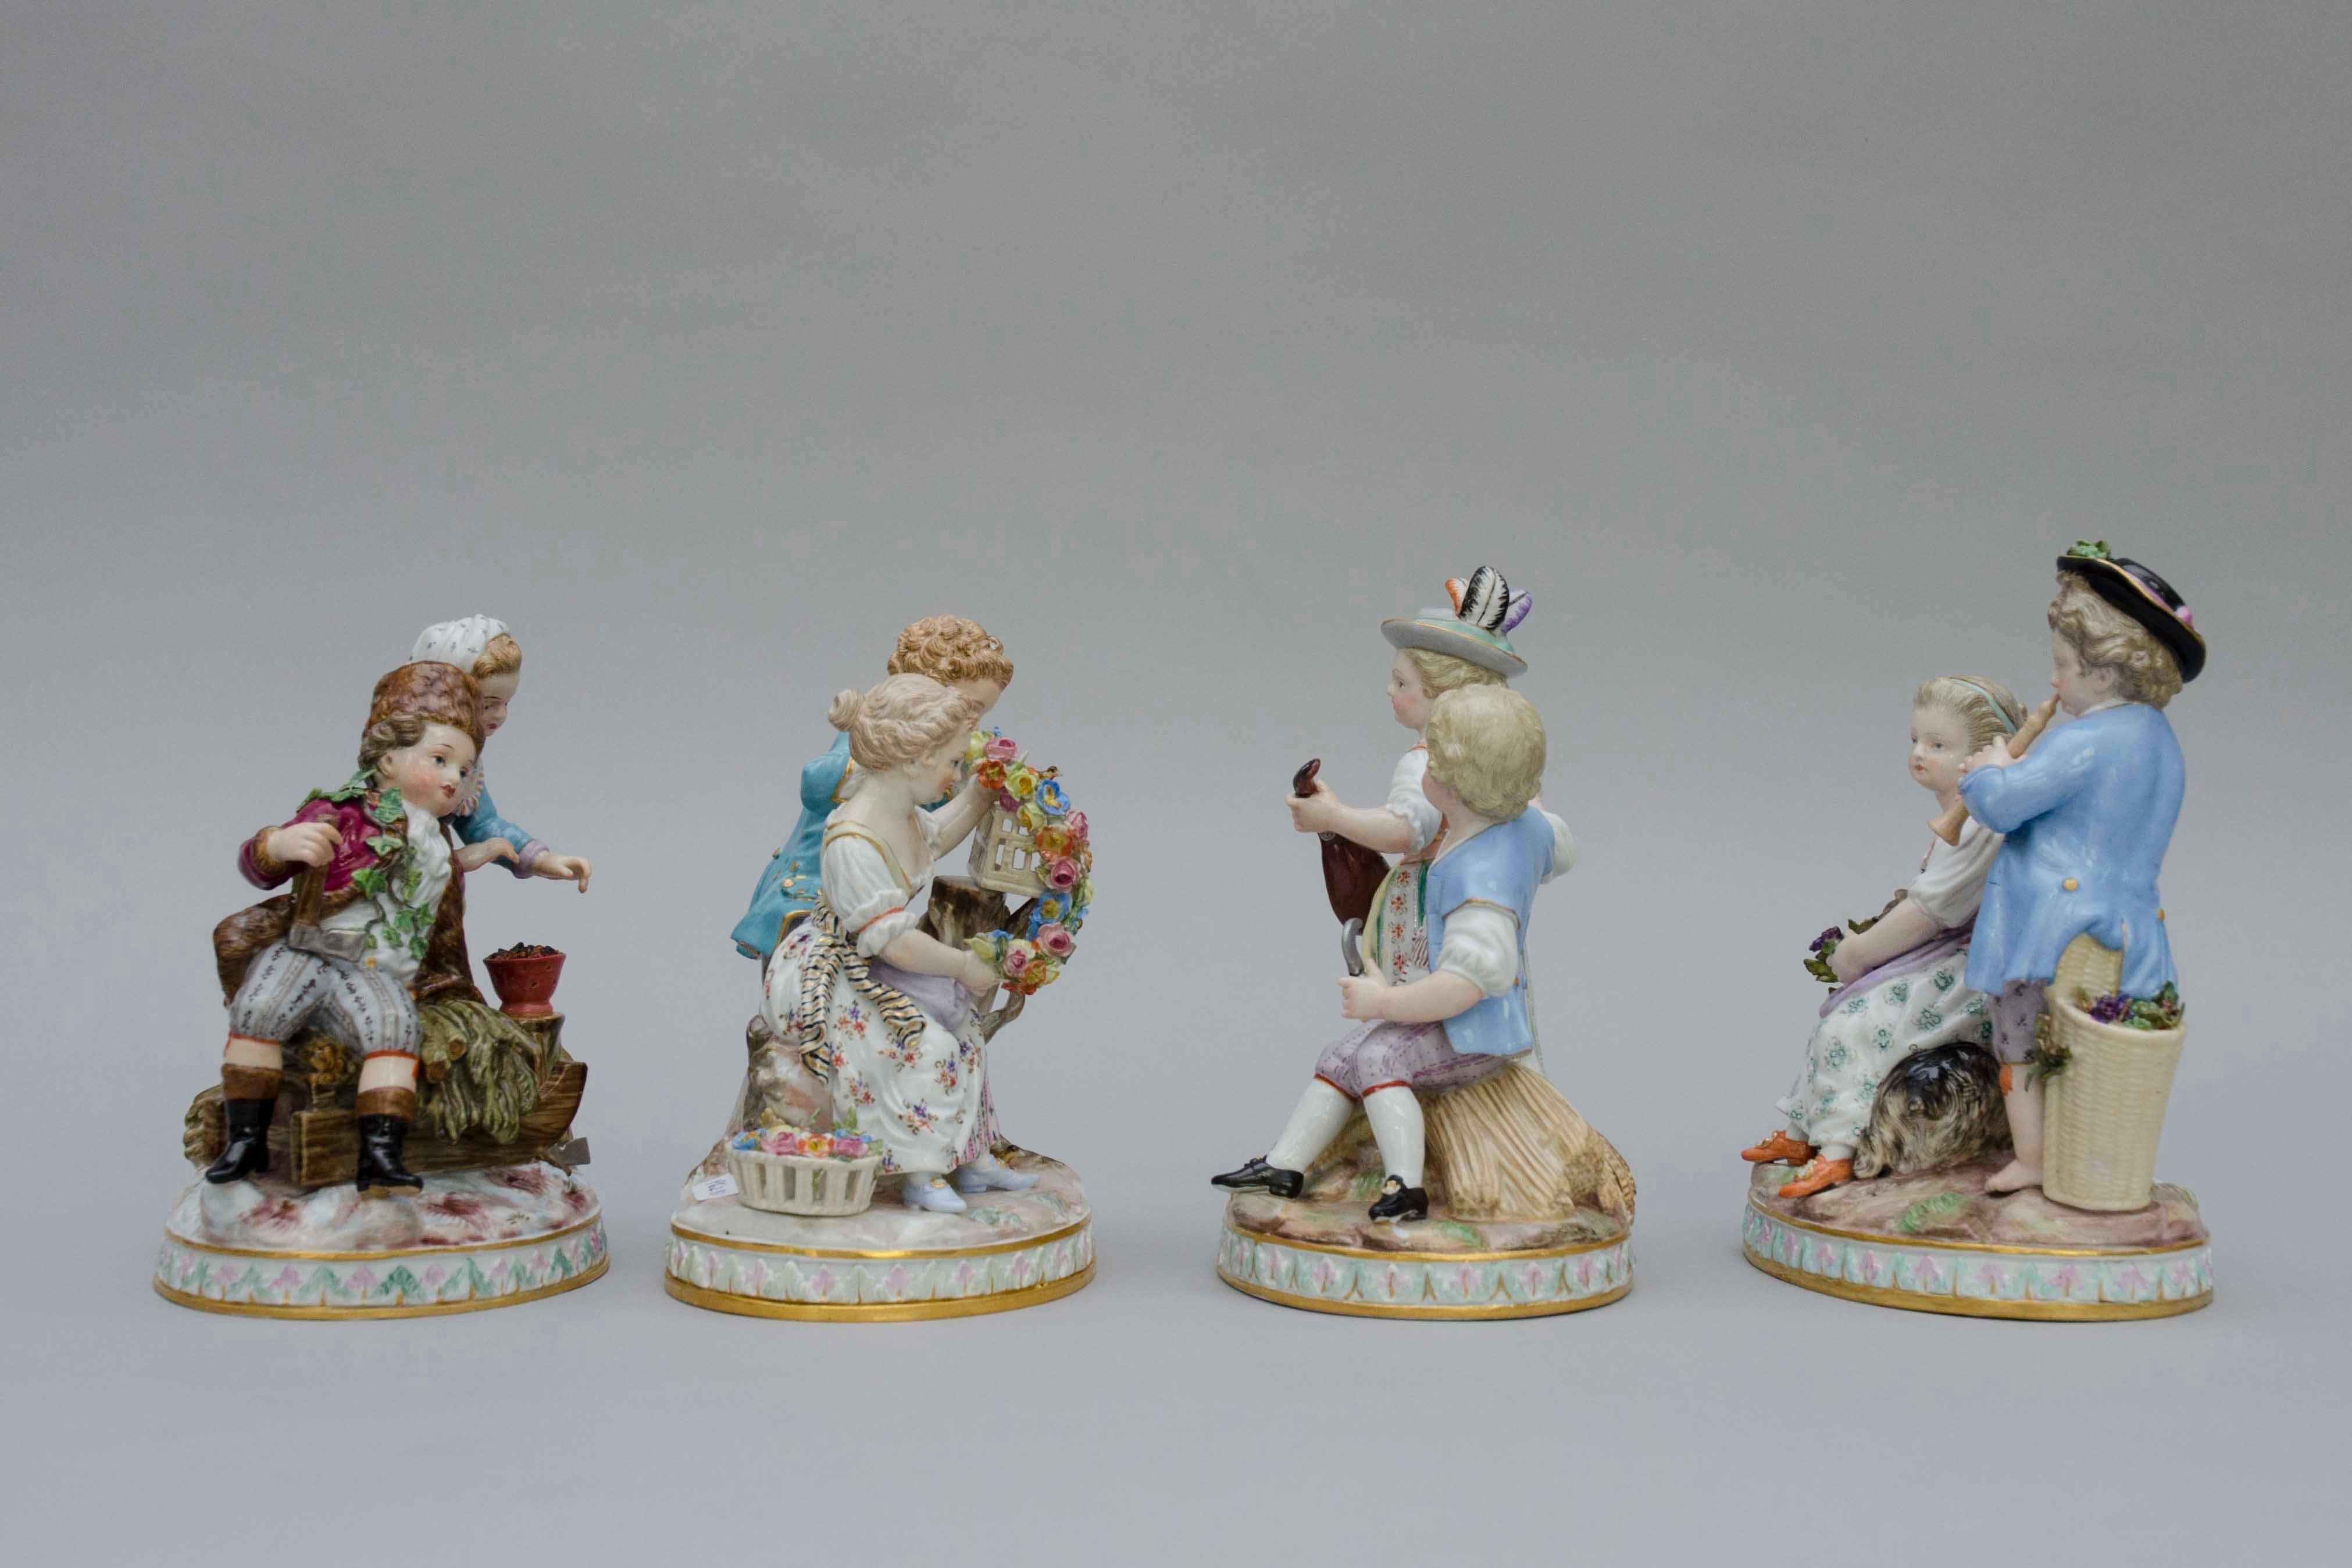 Series of four groups with two children, each representing one saison. Beautiful details and colors.

Dimension: H 16cm

Meissen, second part of the 19th century.

Meissen was founded in 1710 in the gothic Albrechtburg castle. It was the first